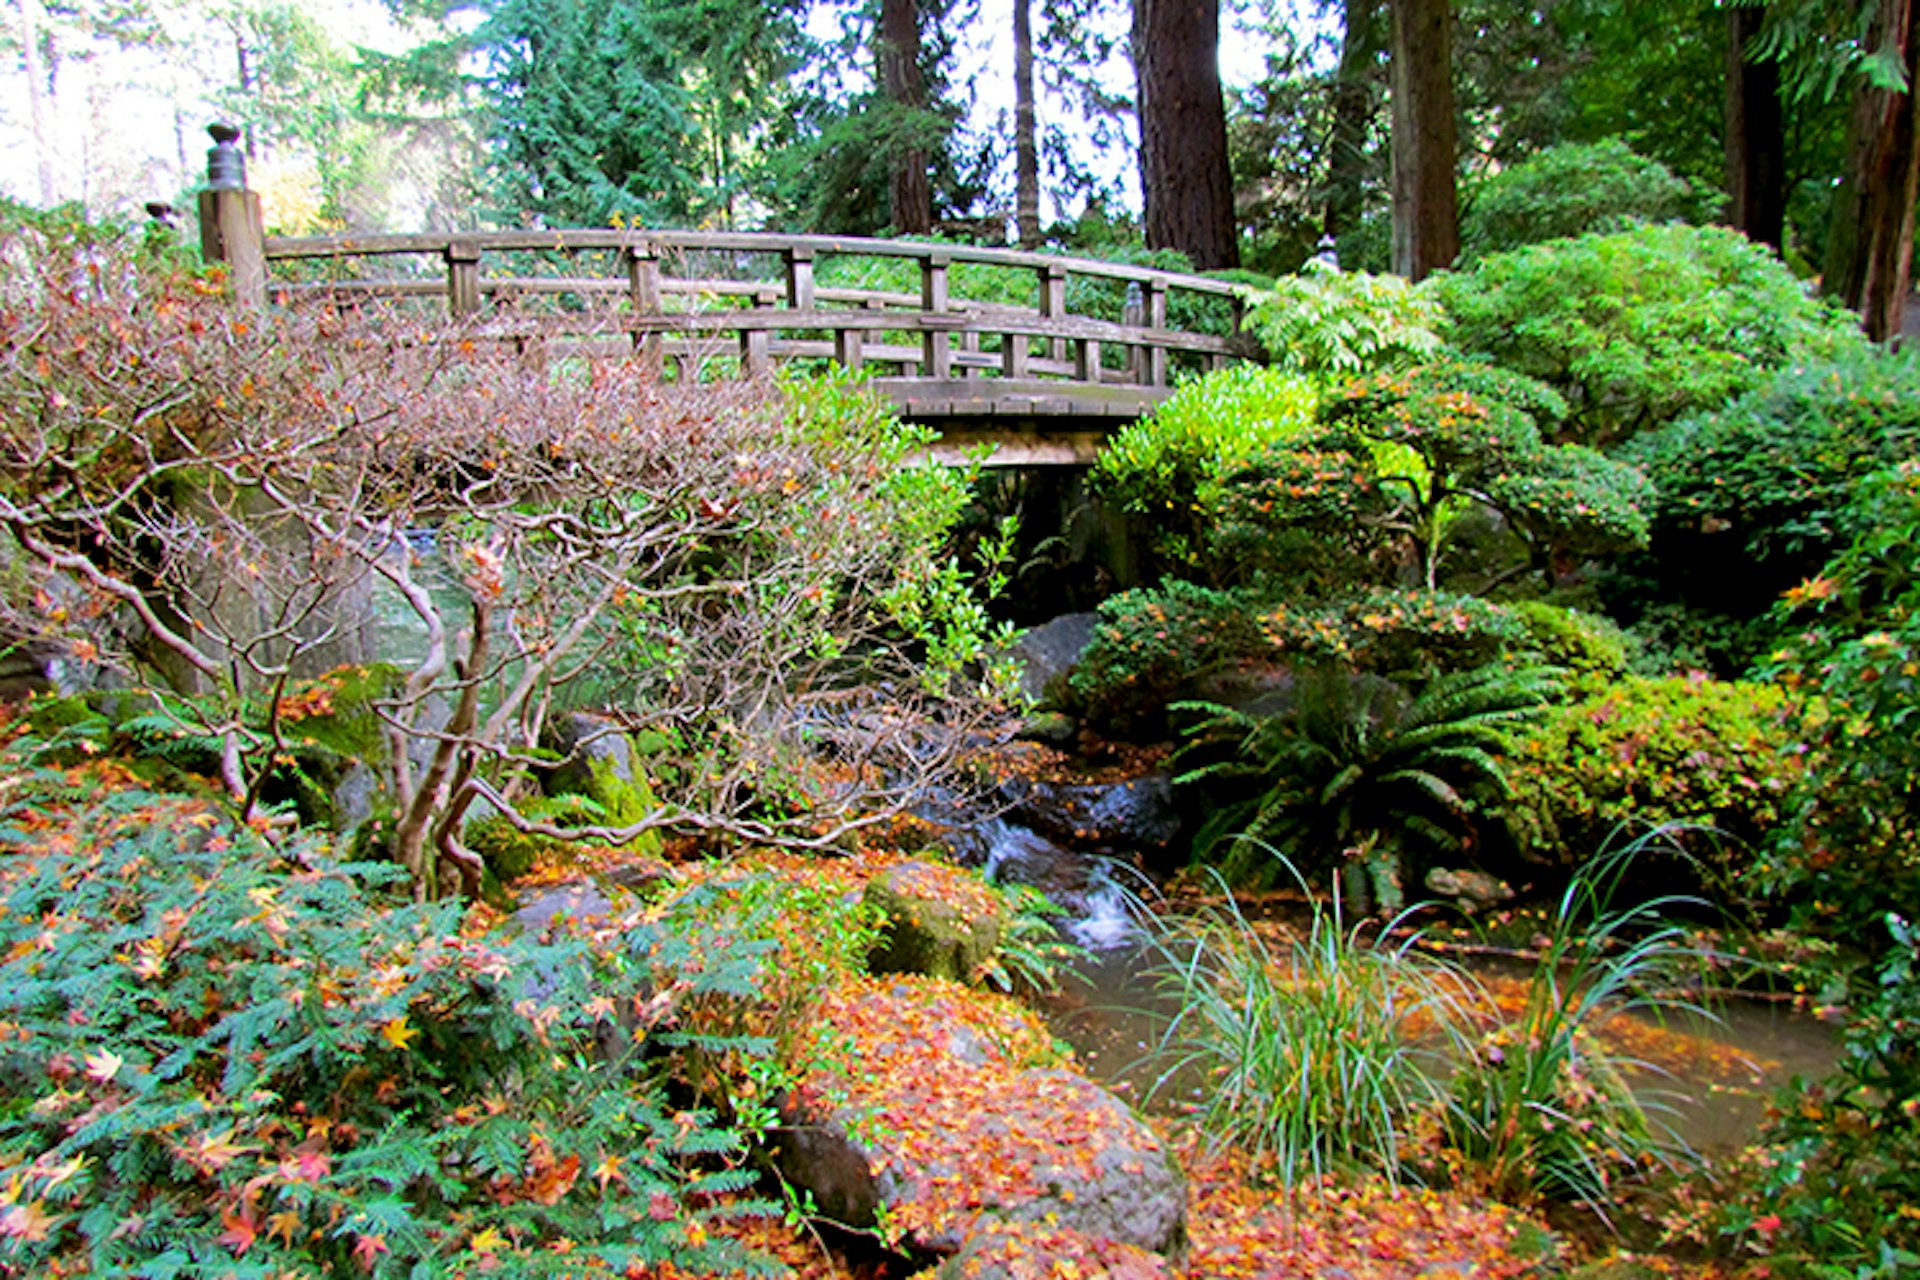 The Japanese Garden is 5.5 acres of pure serenity. Image by Jeff Gunn / CC BY 2.0 